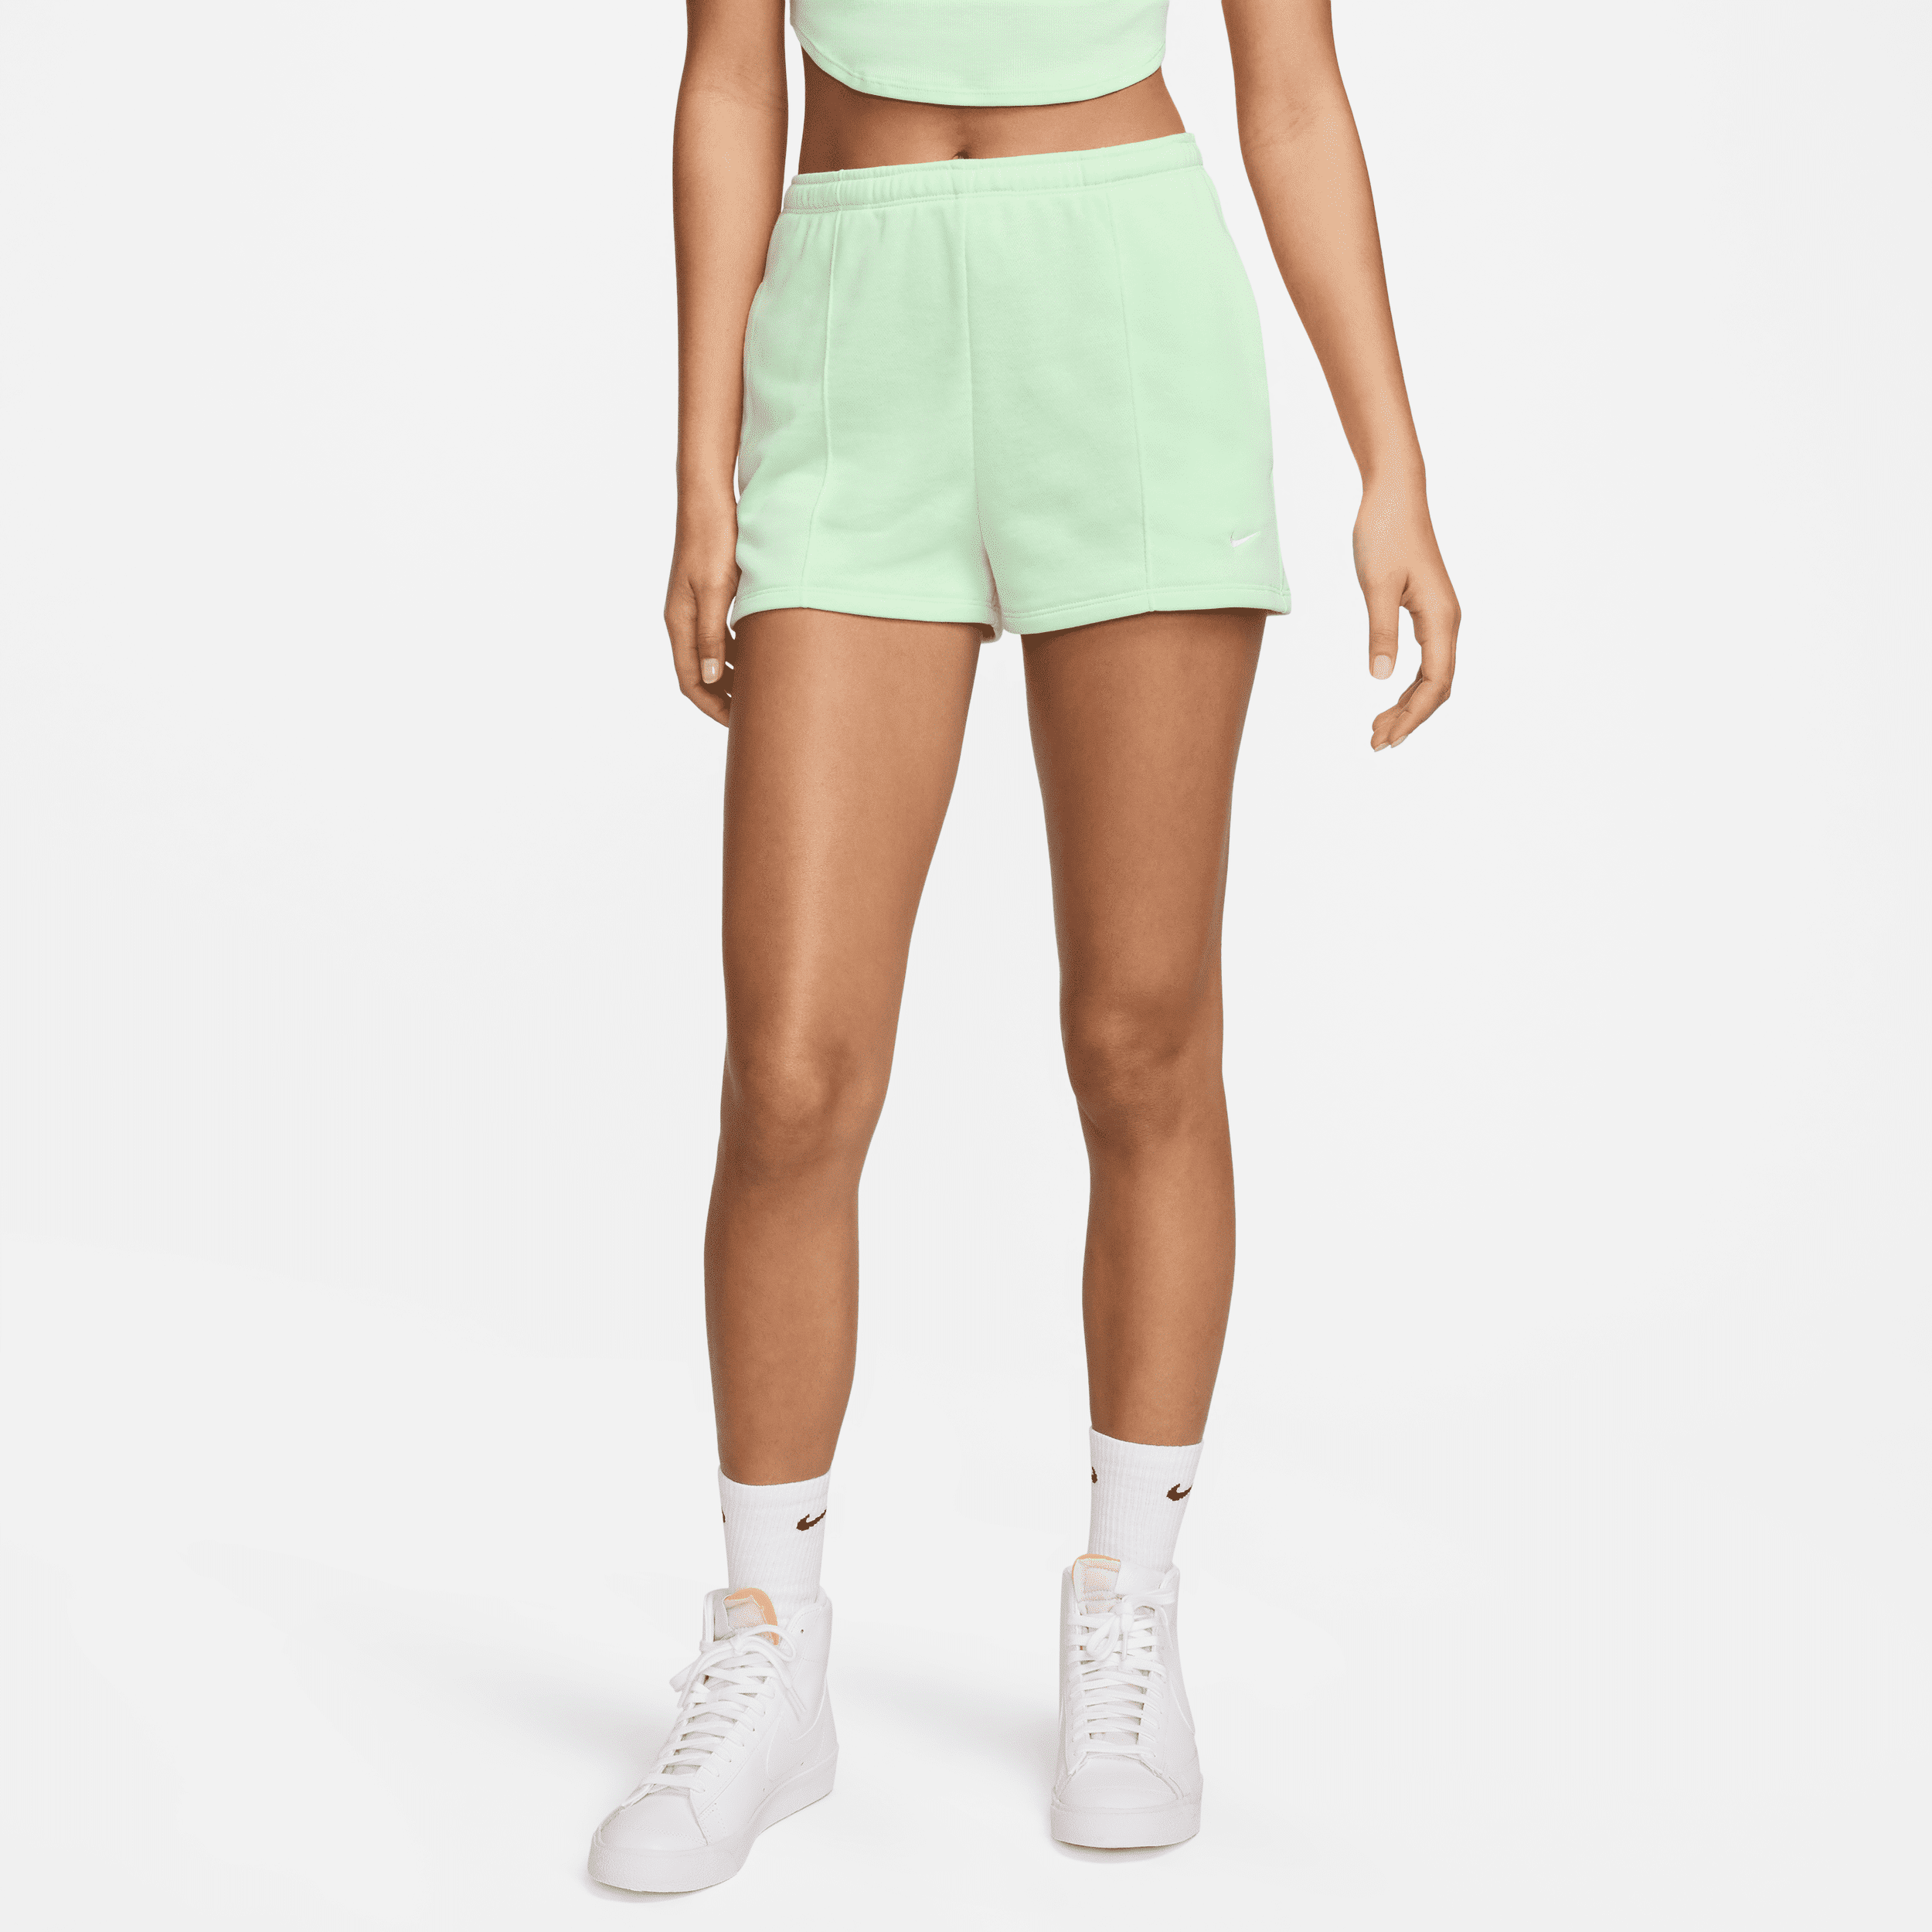 nike shorts slim fit a vita alta in french terry 5 cm  sportswear chill terry – donna - verde